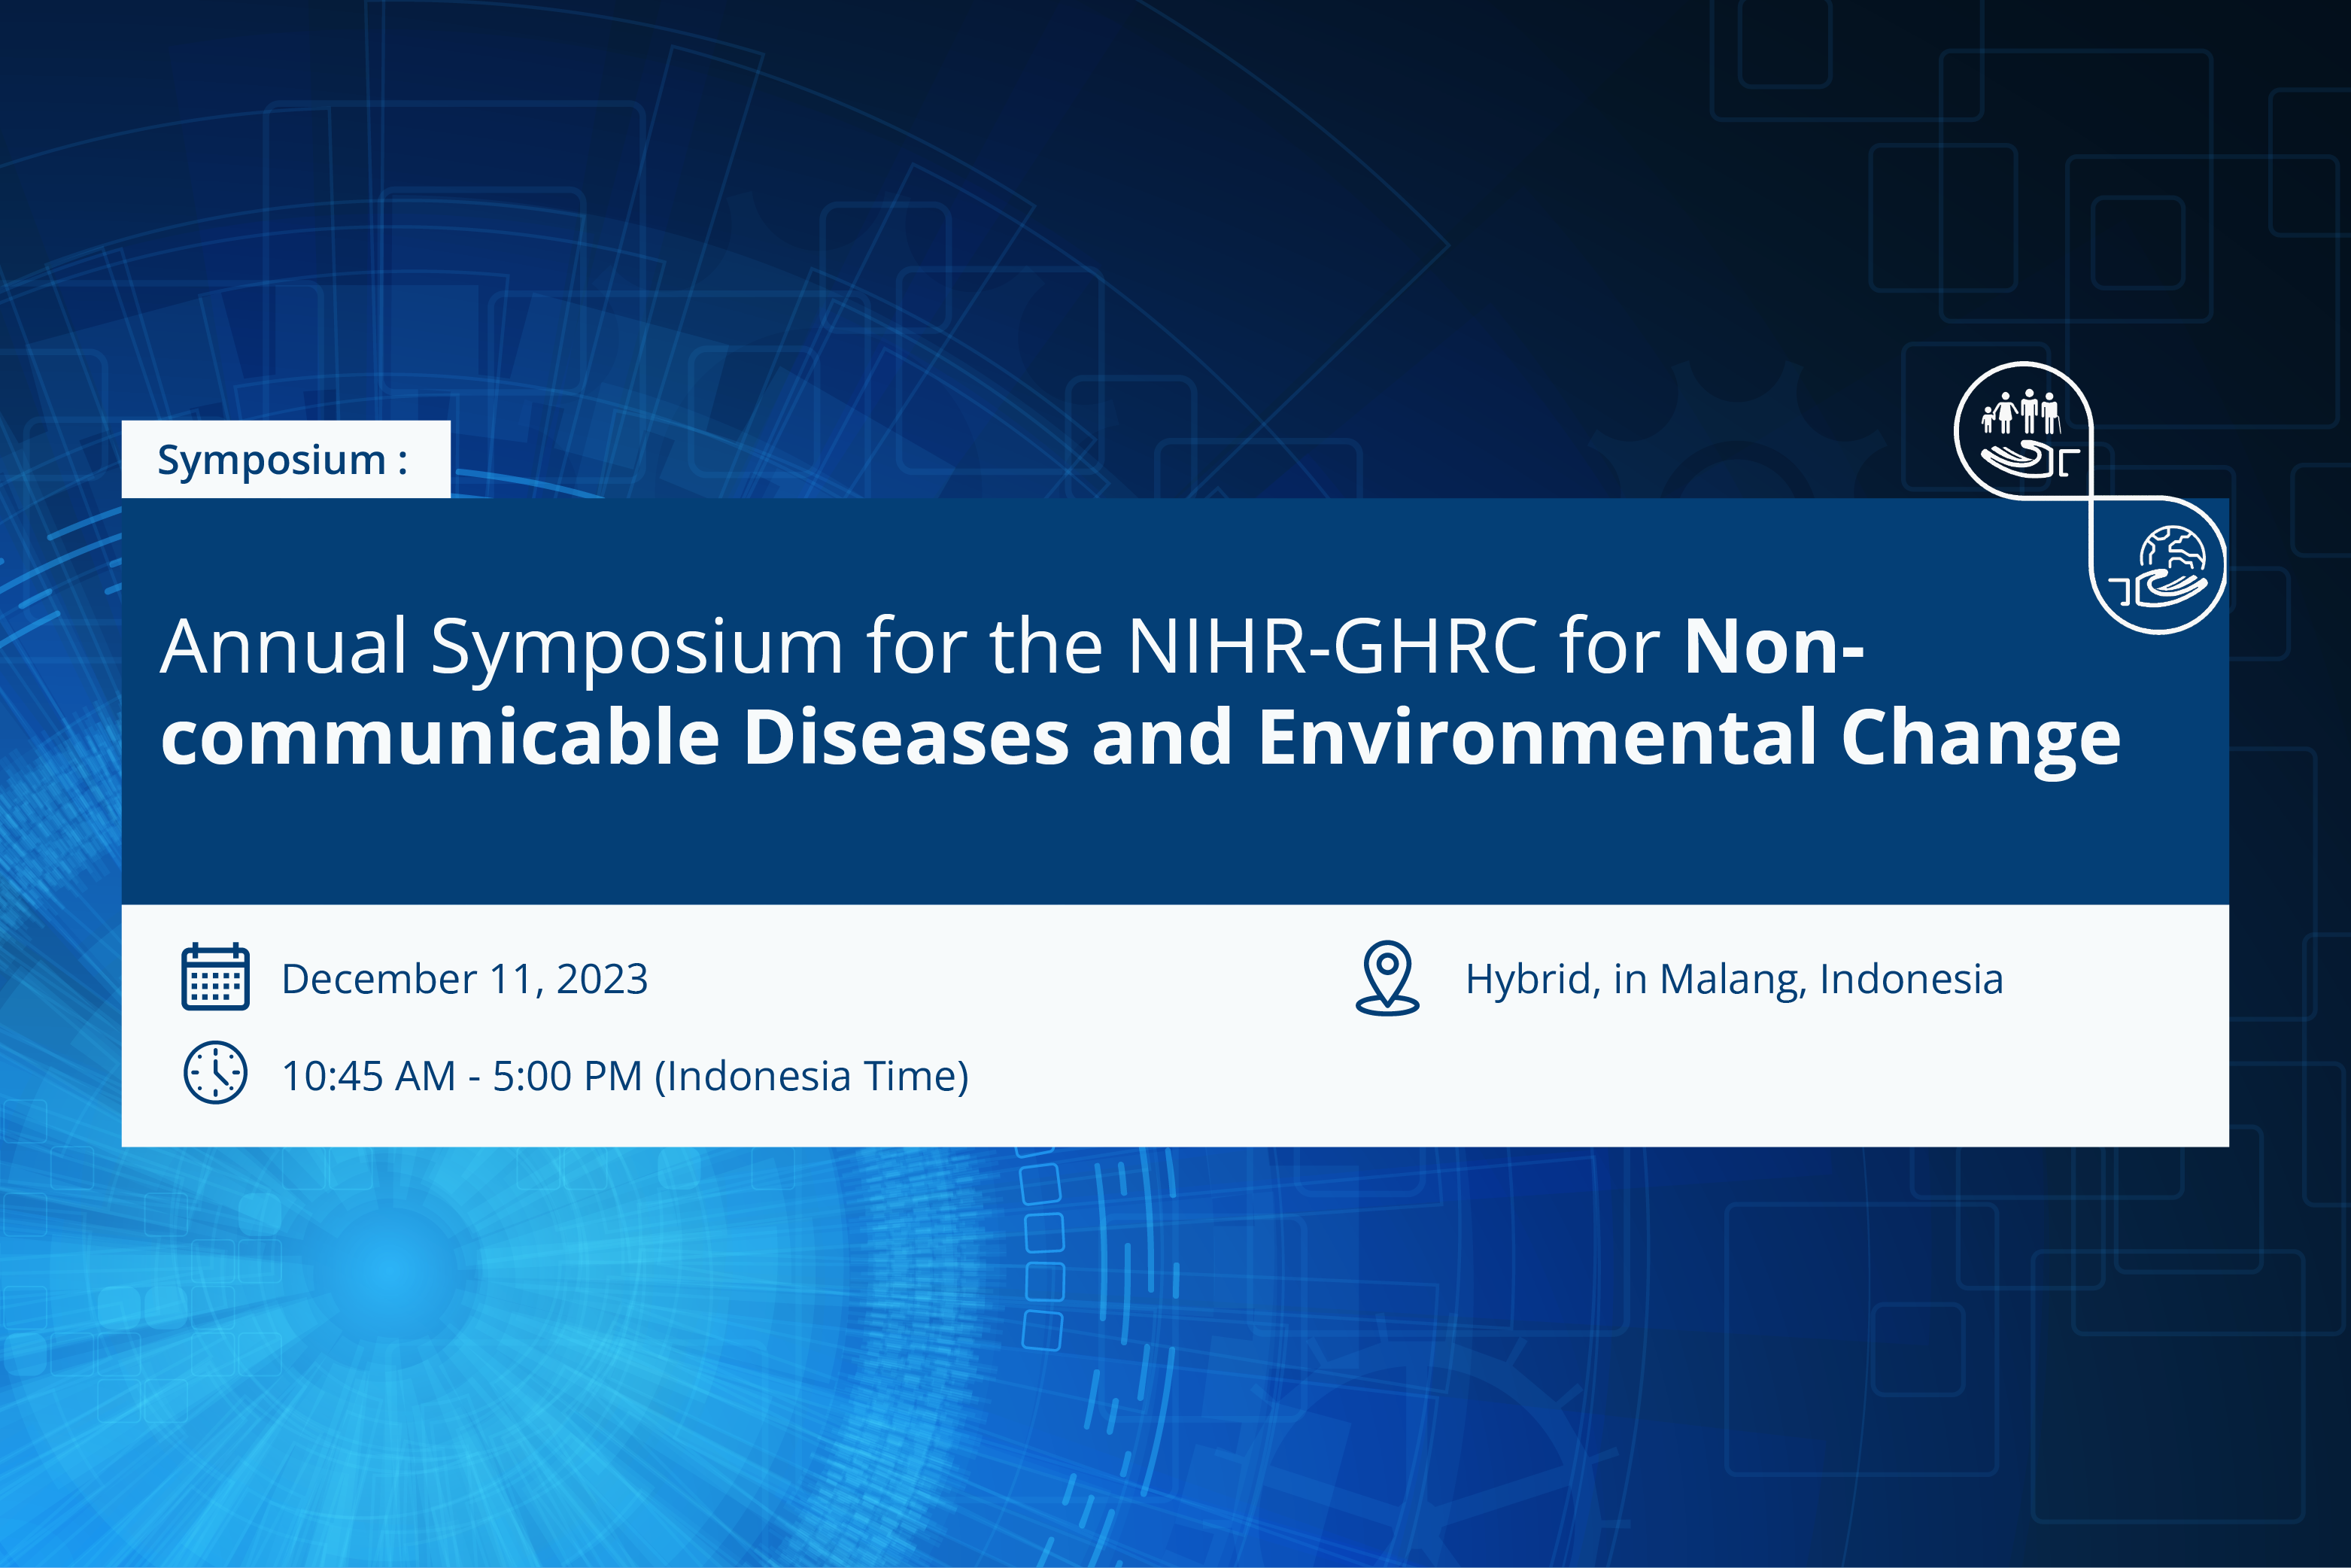 Annual Symposium for the NIHR-GHRC for Non-communicable Diseases and Environmental Change